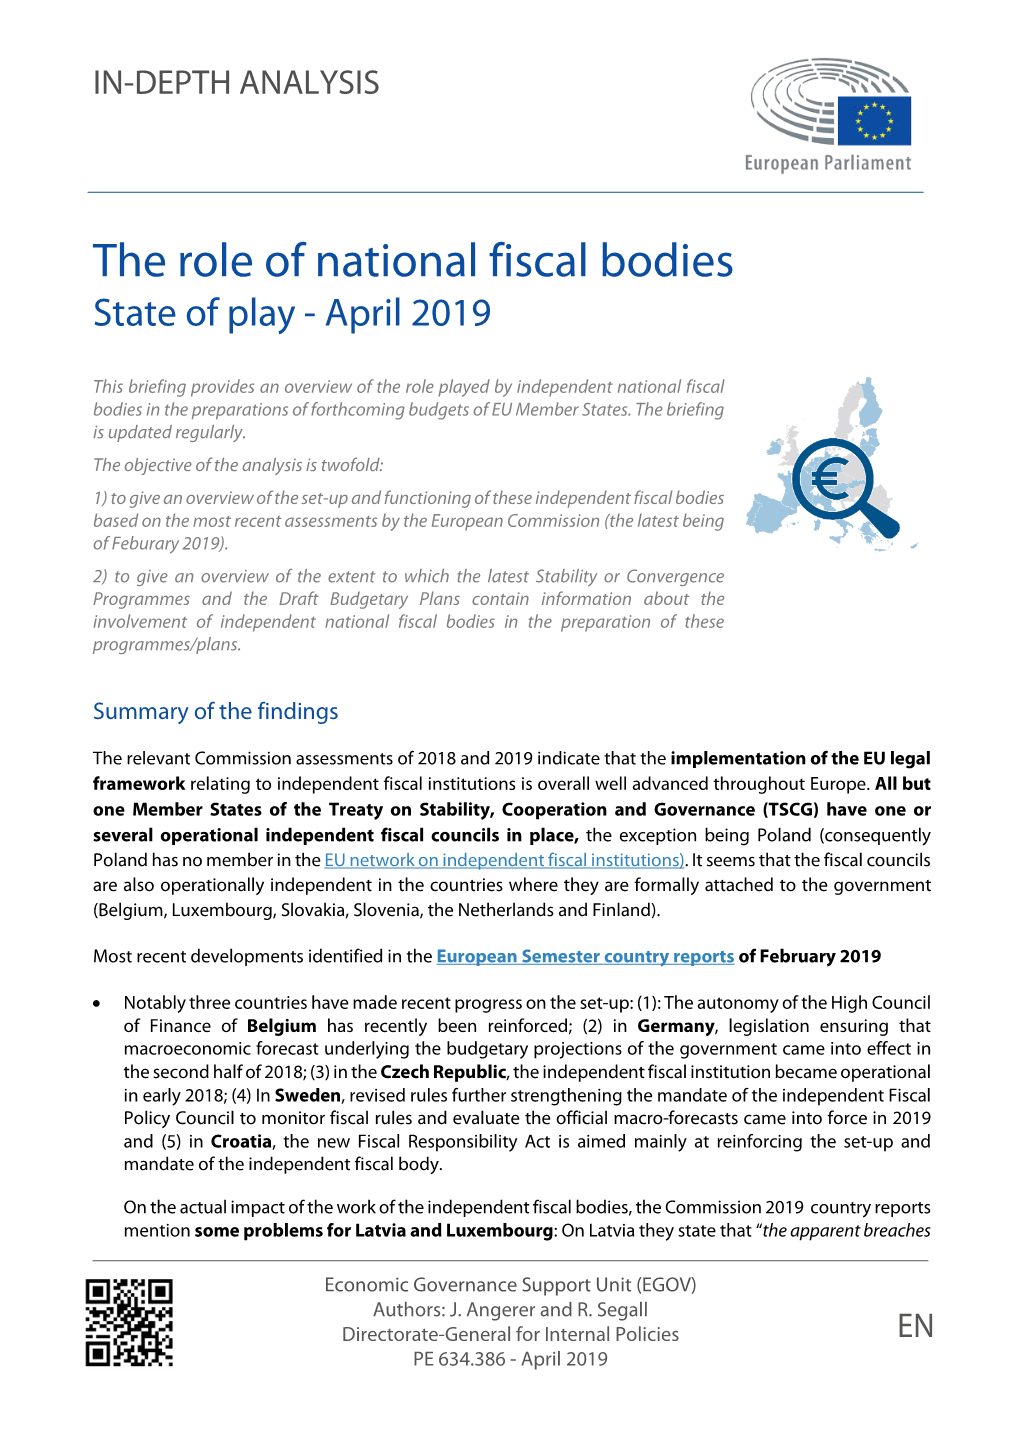 The Role of National Fiscal Bodies State of Play - April 2019